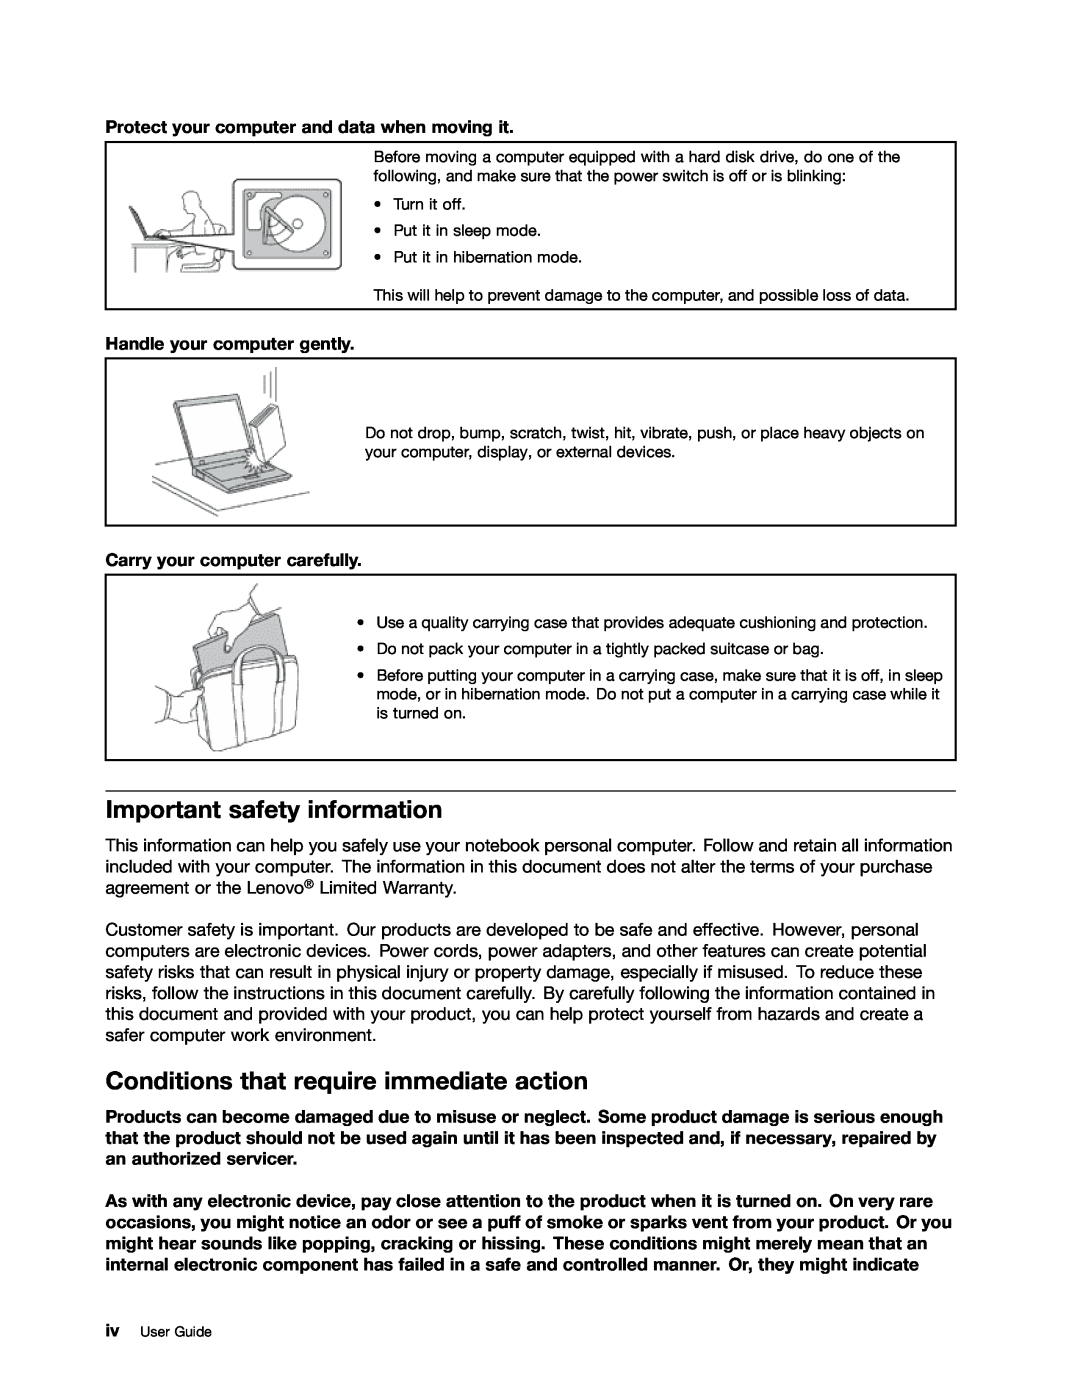 Lenovo 59366616, B590 Important safety information, Conditions that require immediate action, Handle your computer gently 